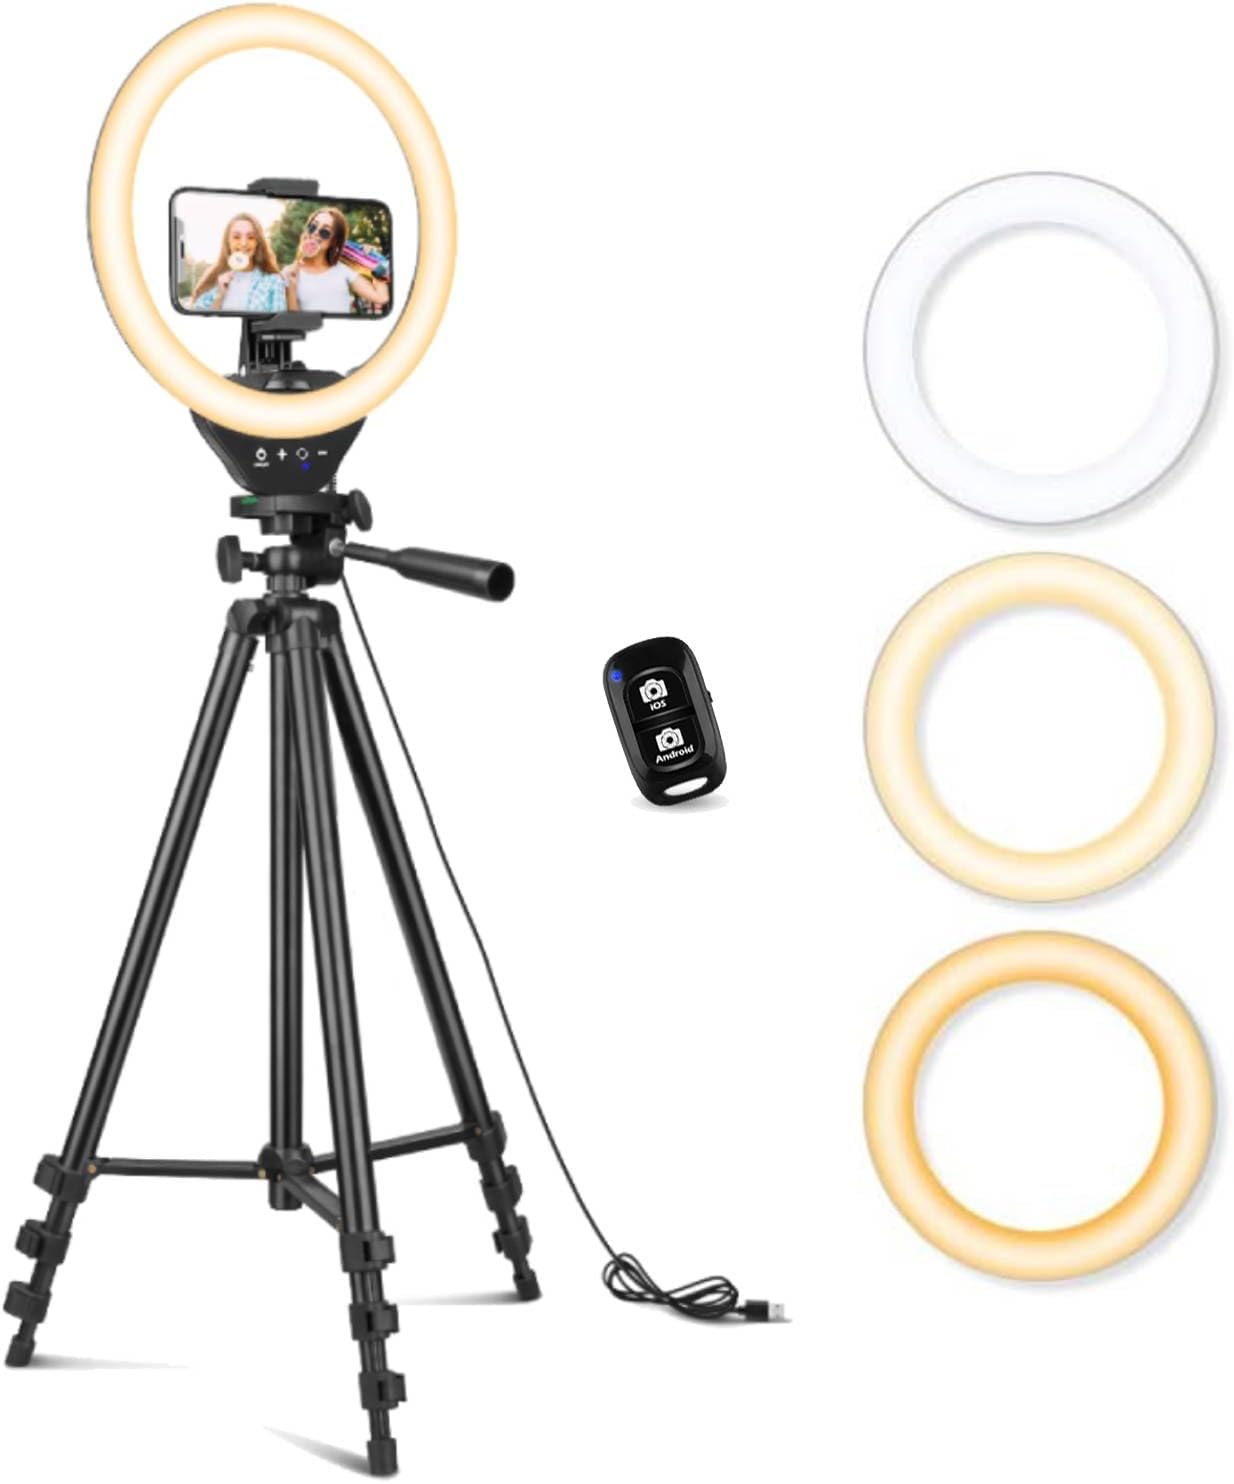 Sensyne 10 Ring Light with 50 Extendable Tripod Stand, LED Circle Lights with Phone Holder for Live Stream/Makeup/YouTube Video/TikTok, Compatible with All Phones